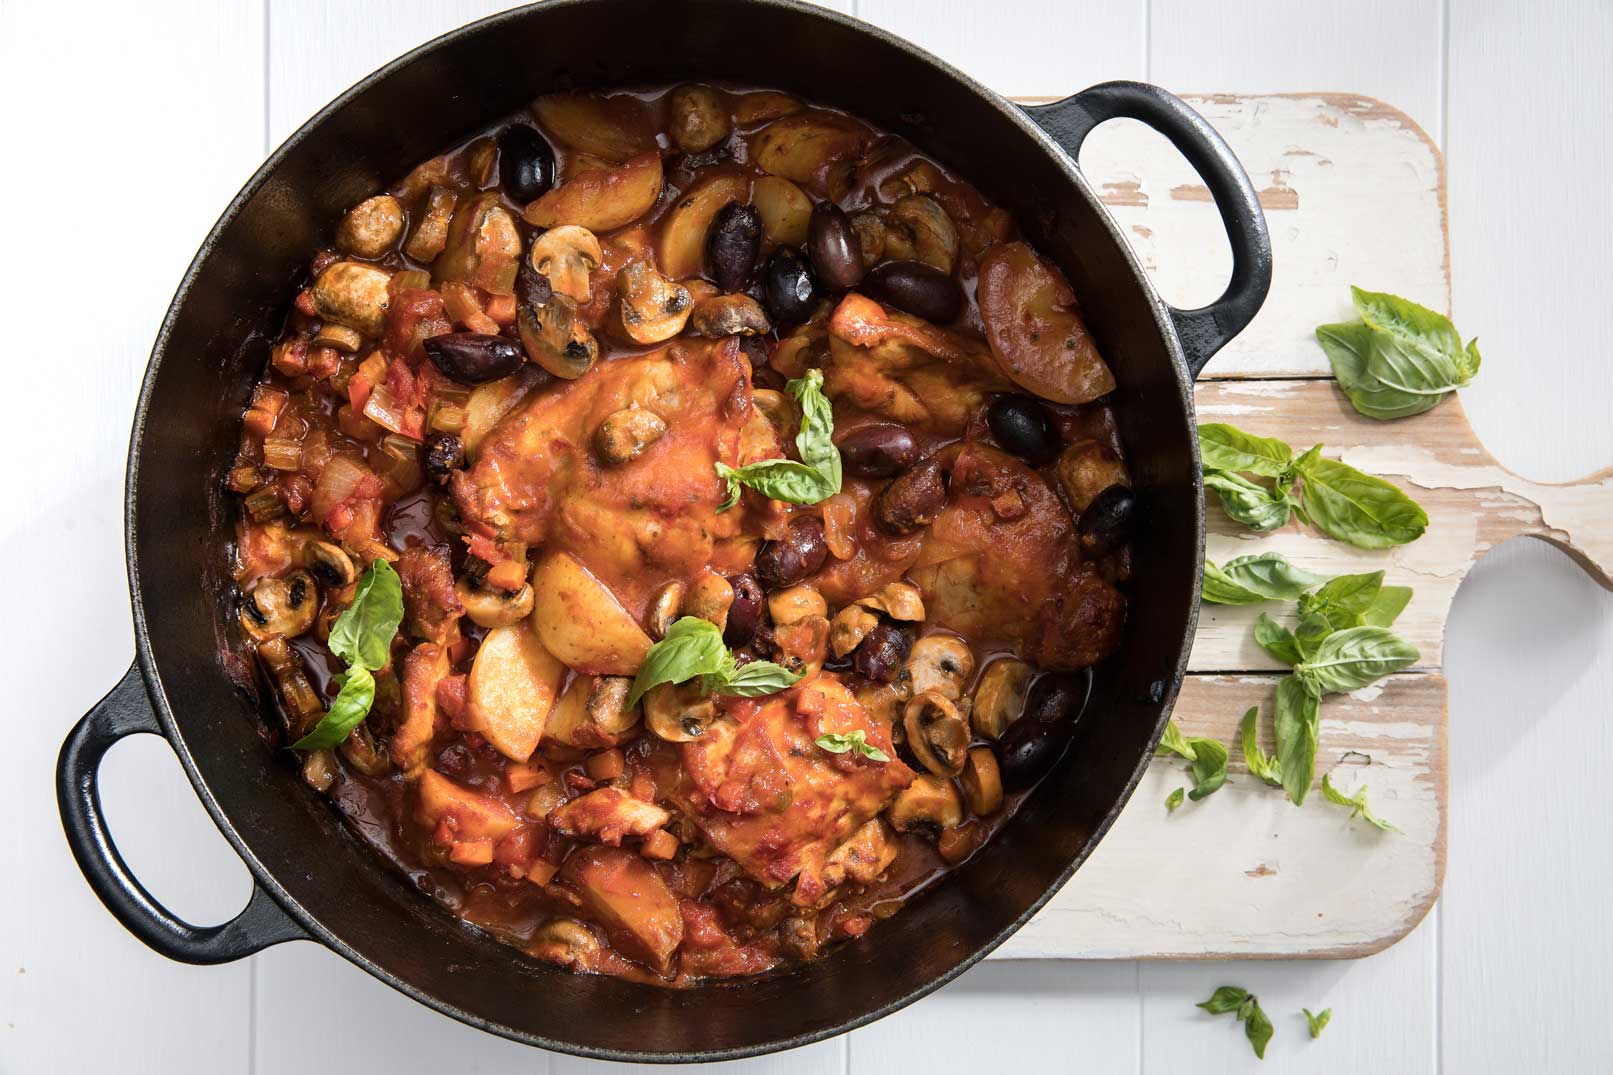 Slow cooker chicken cacciatore recipe in a large black pot with handles served on a white cutting board with a sprinkle of basil on top and the side for serving.